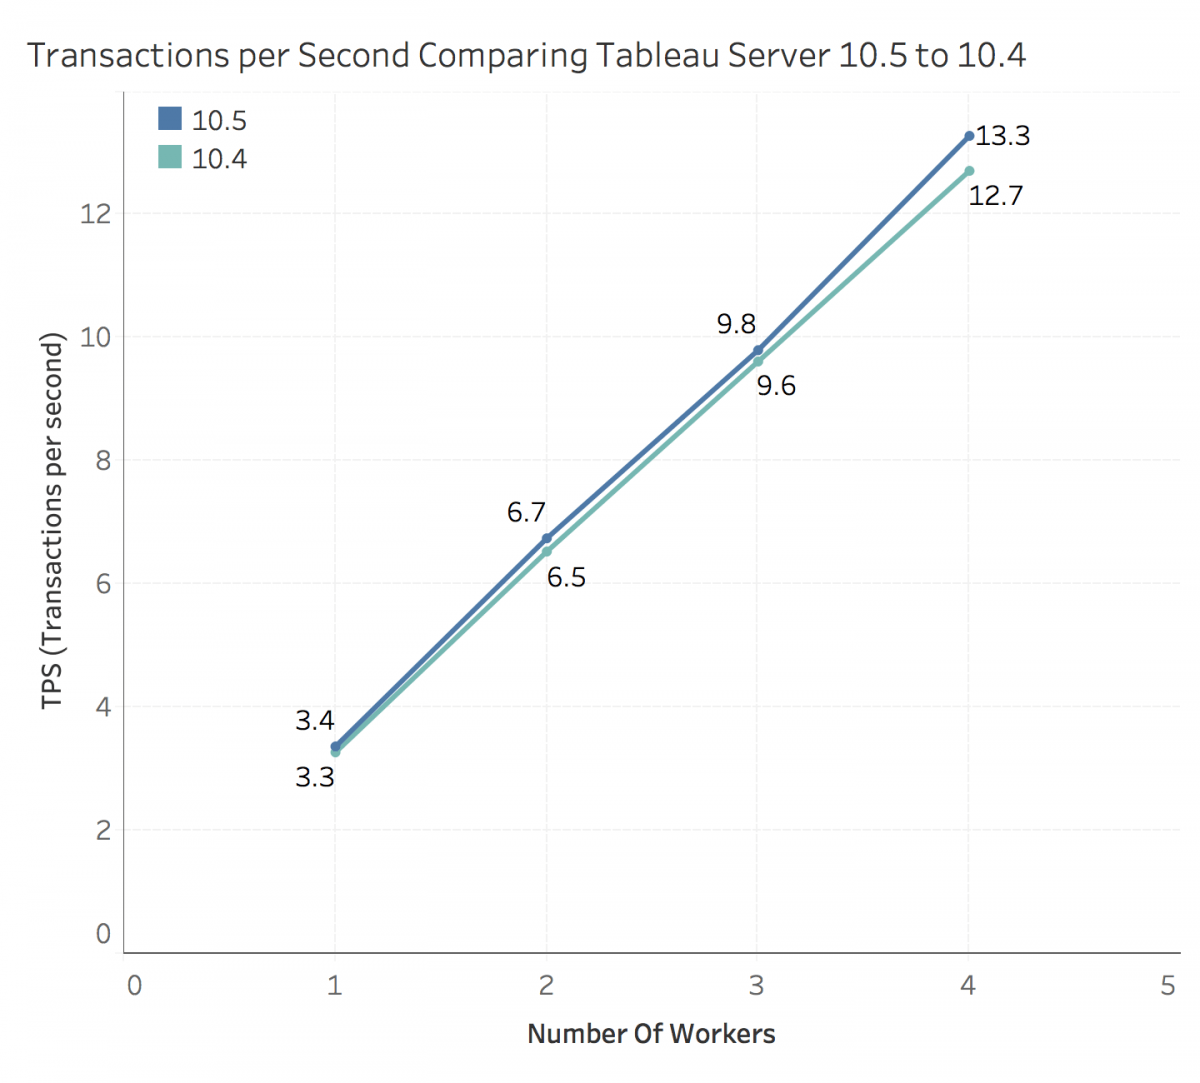 Transactions per Second Comparing Tableau Server 10.5 to 10.4